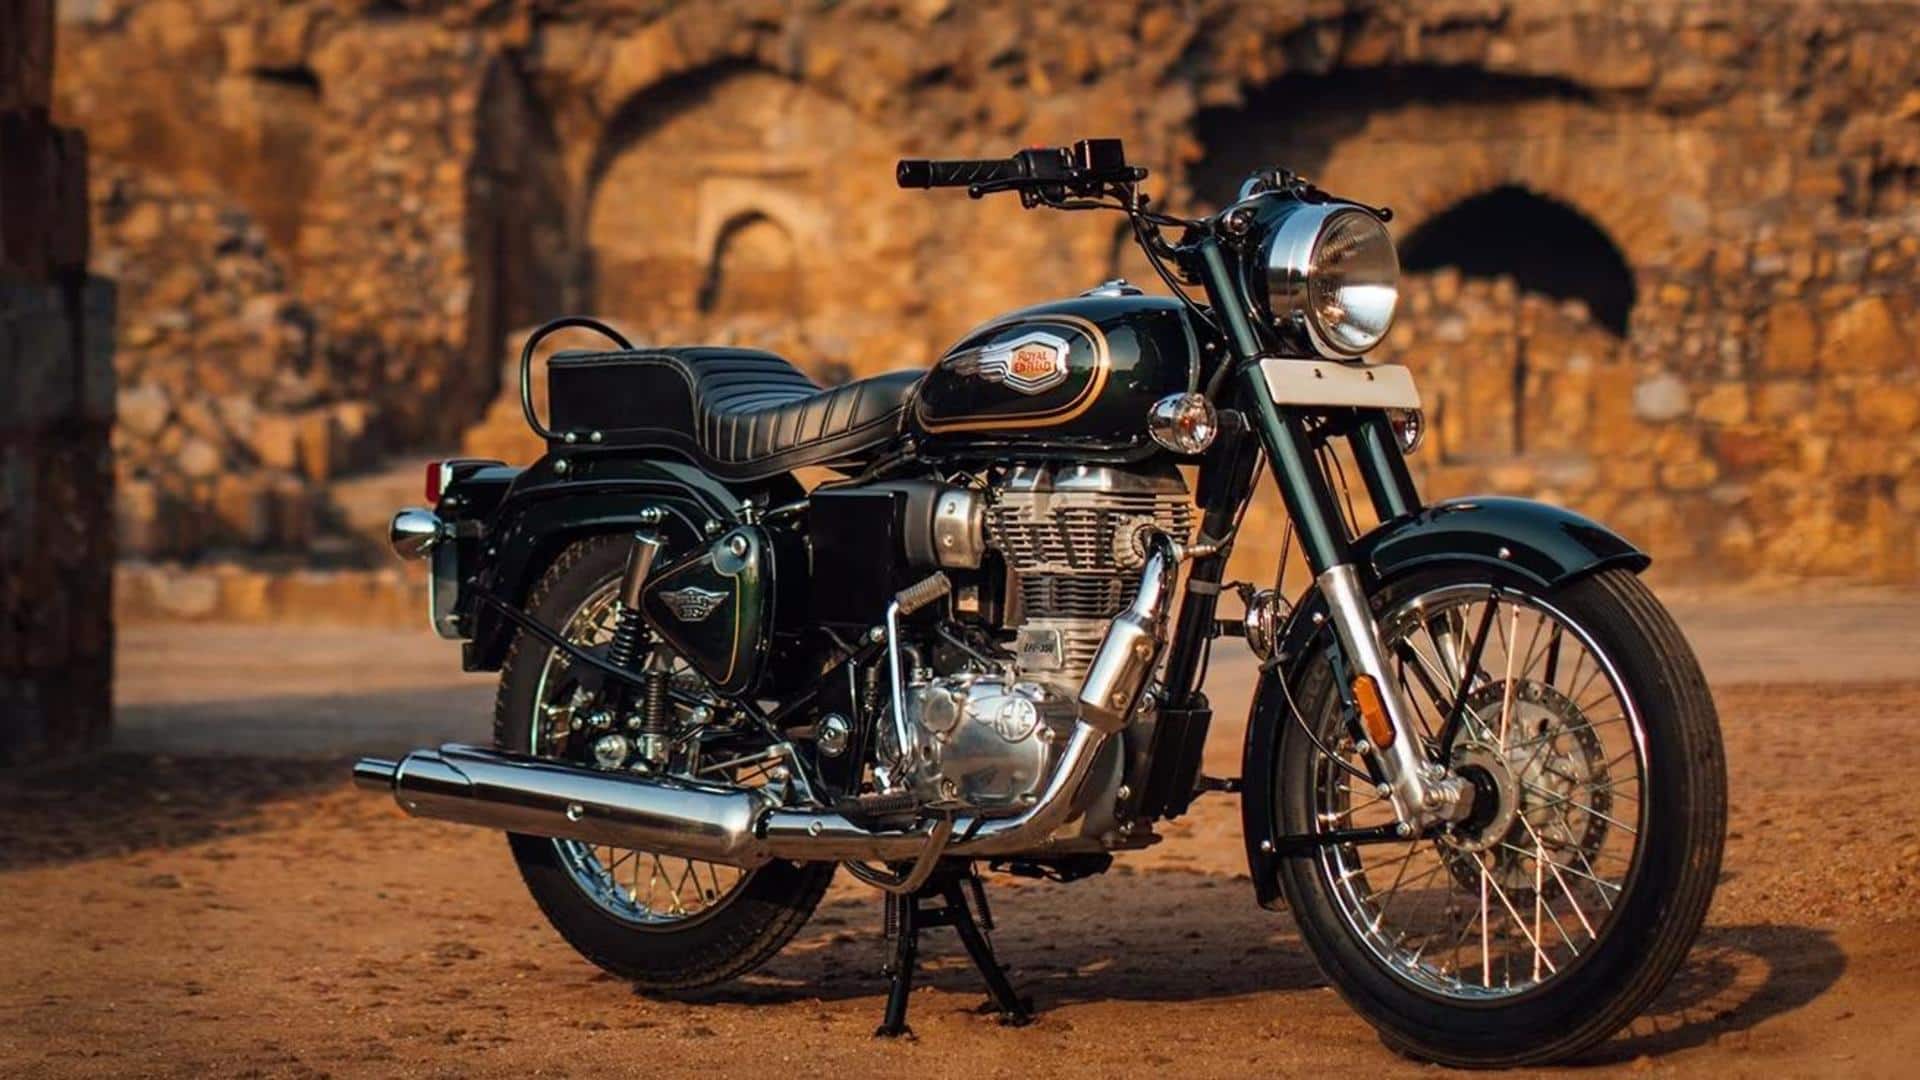 How Royal Enfield plans to revive 'Bullet' moniker in India